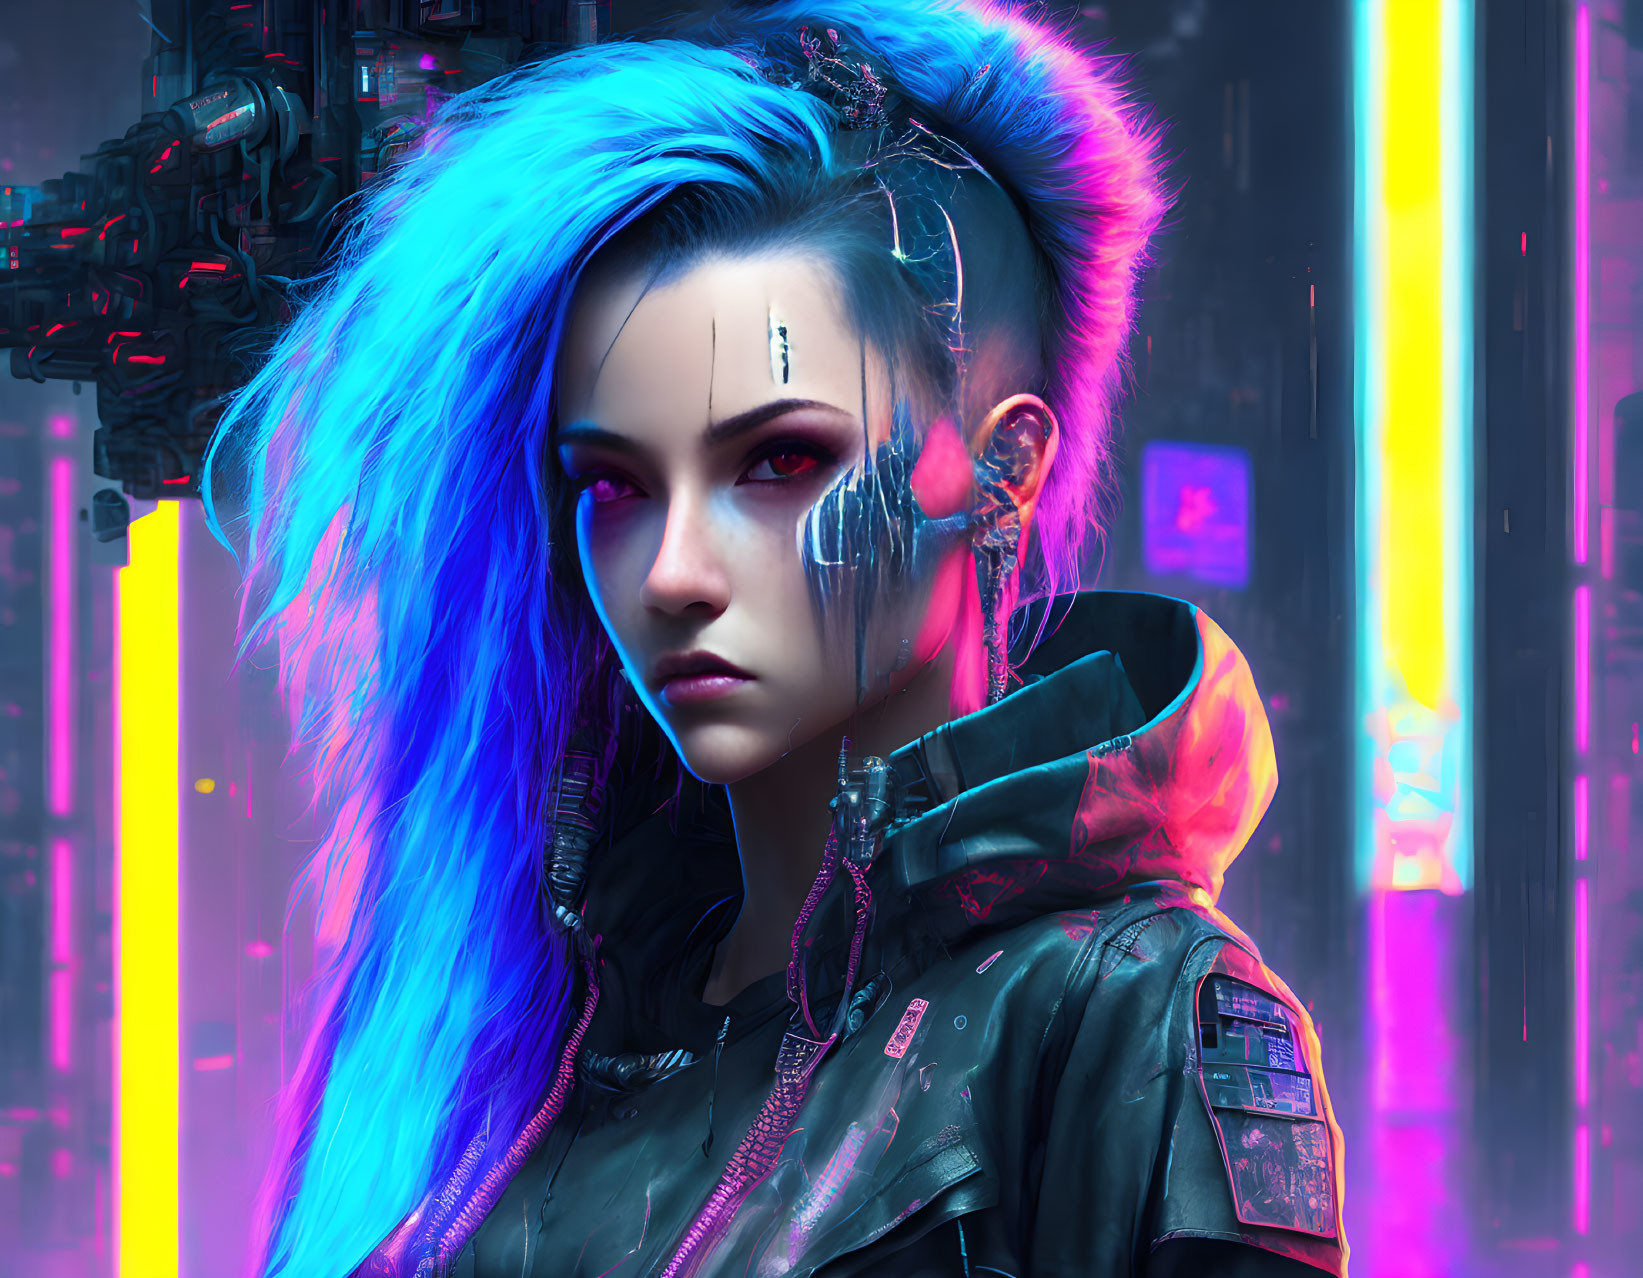 Futuristic digital artwork: Woman with blue hair, cybernetic enhancements, and weapon in neon